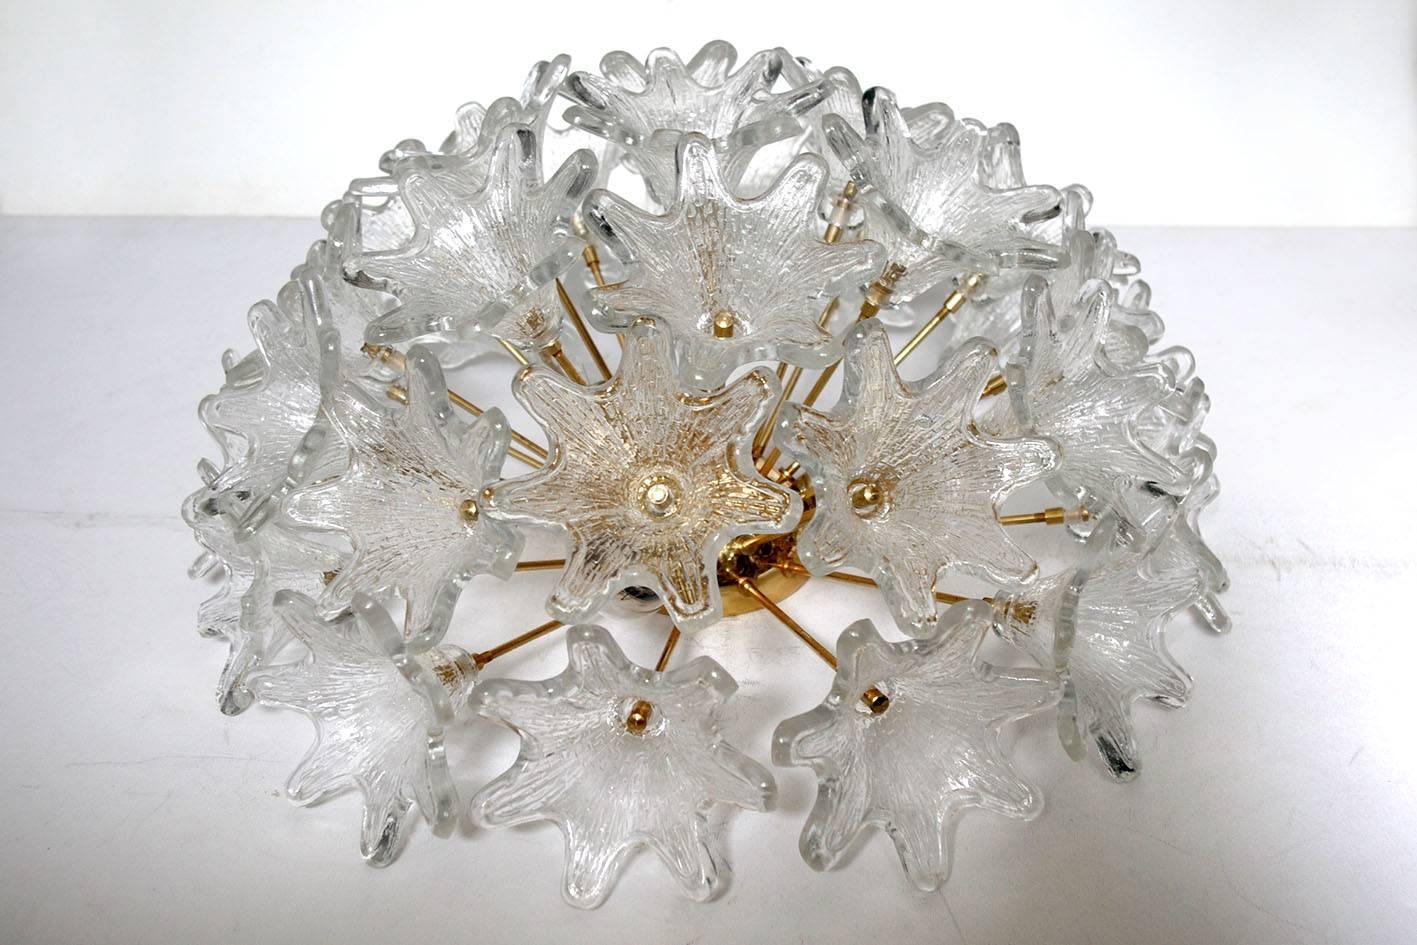 20th Century Murano Glass Wall Ceiling Light Flush Mount Chandelier by Venini for VeArt 1960s